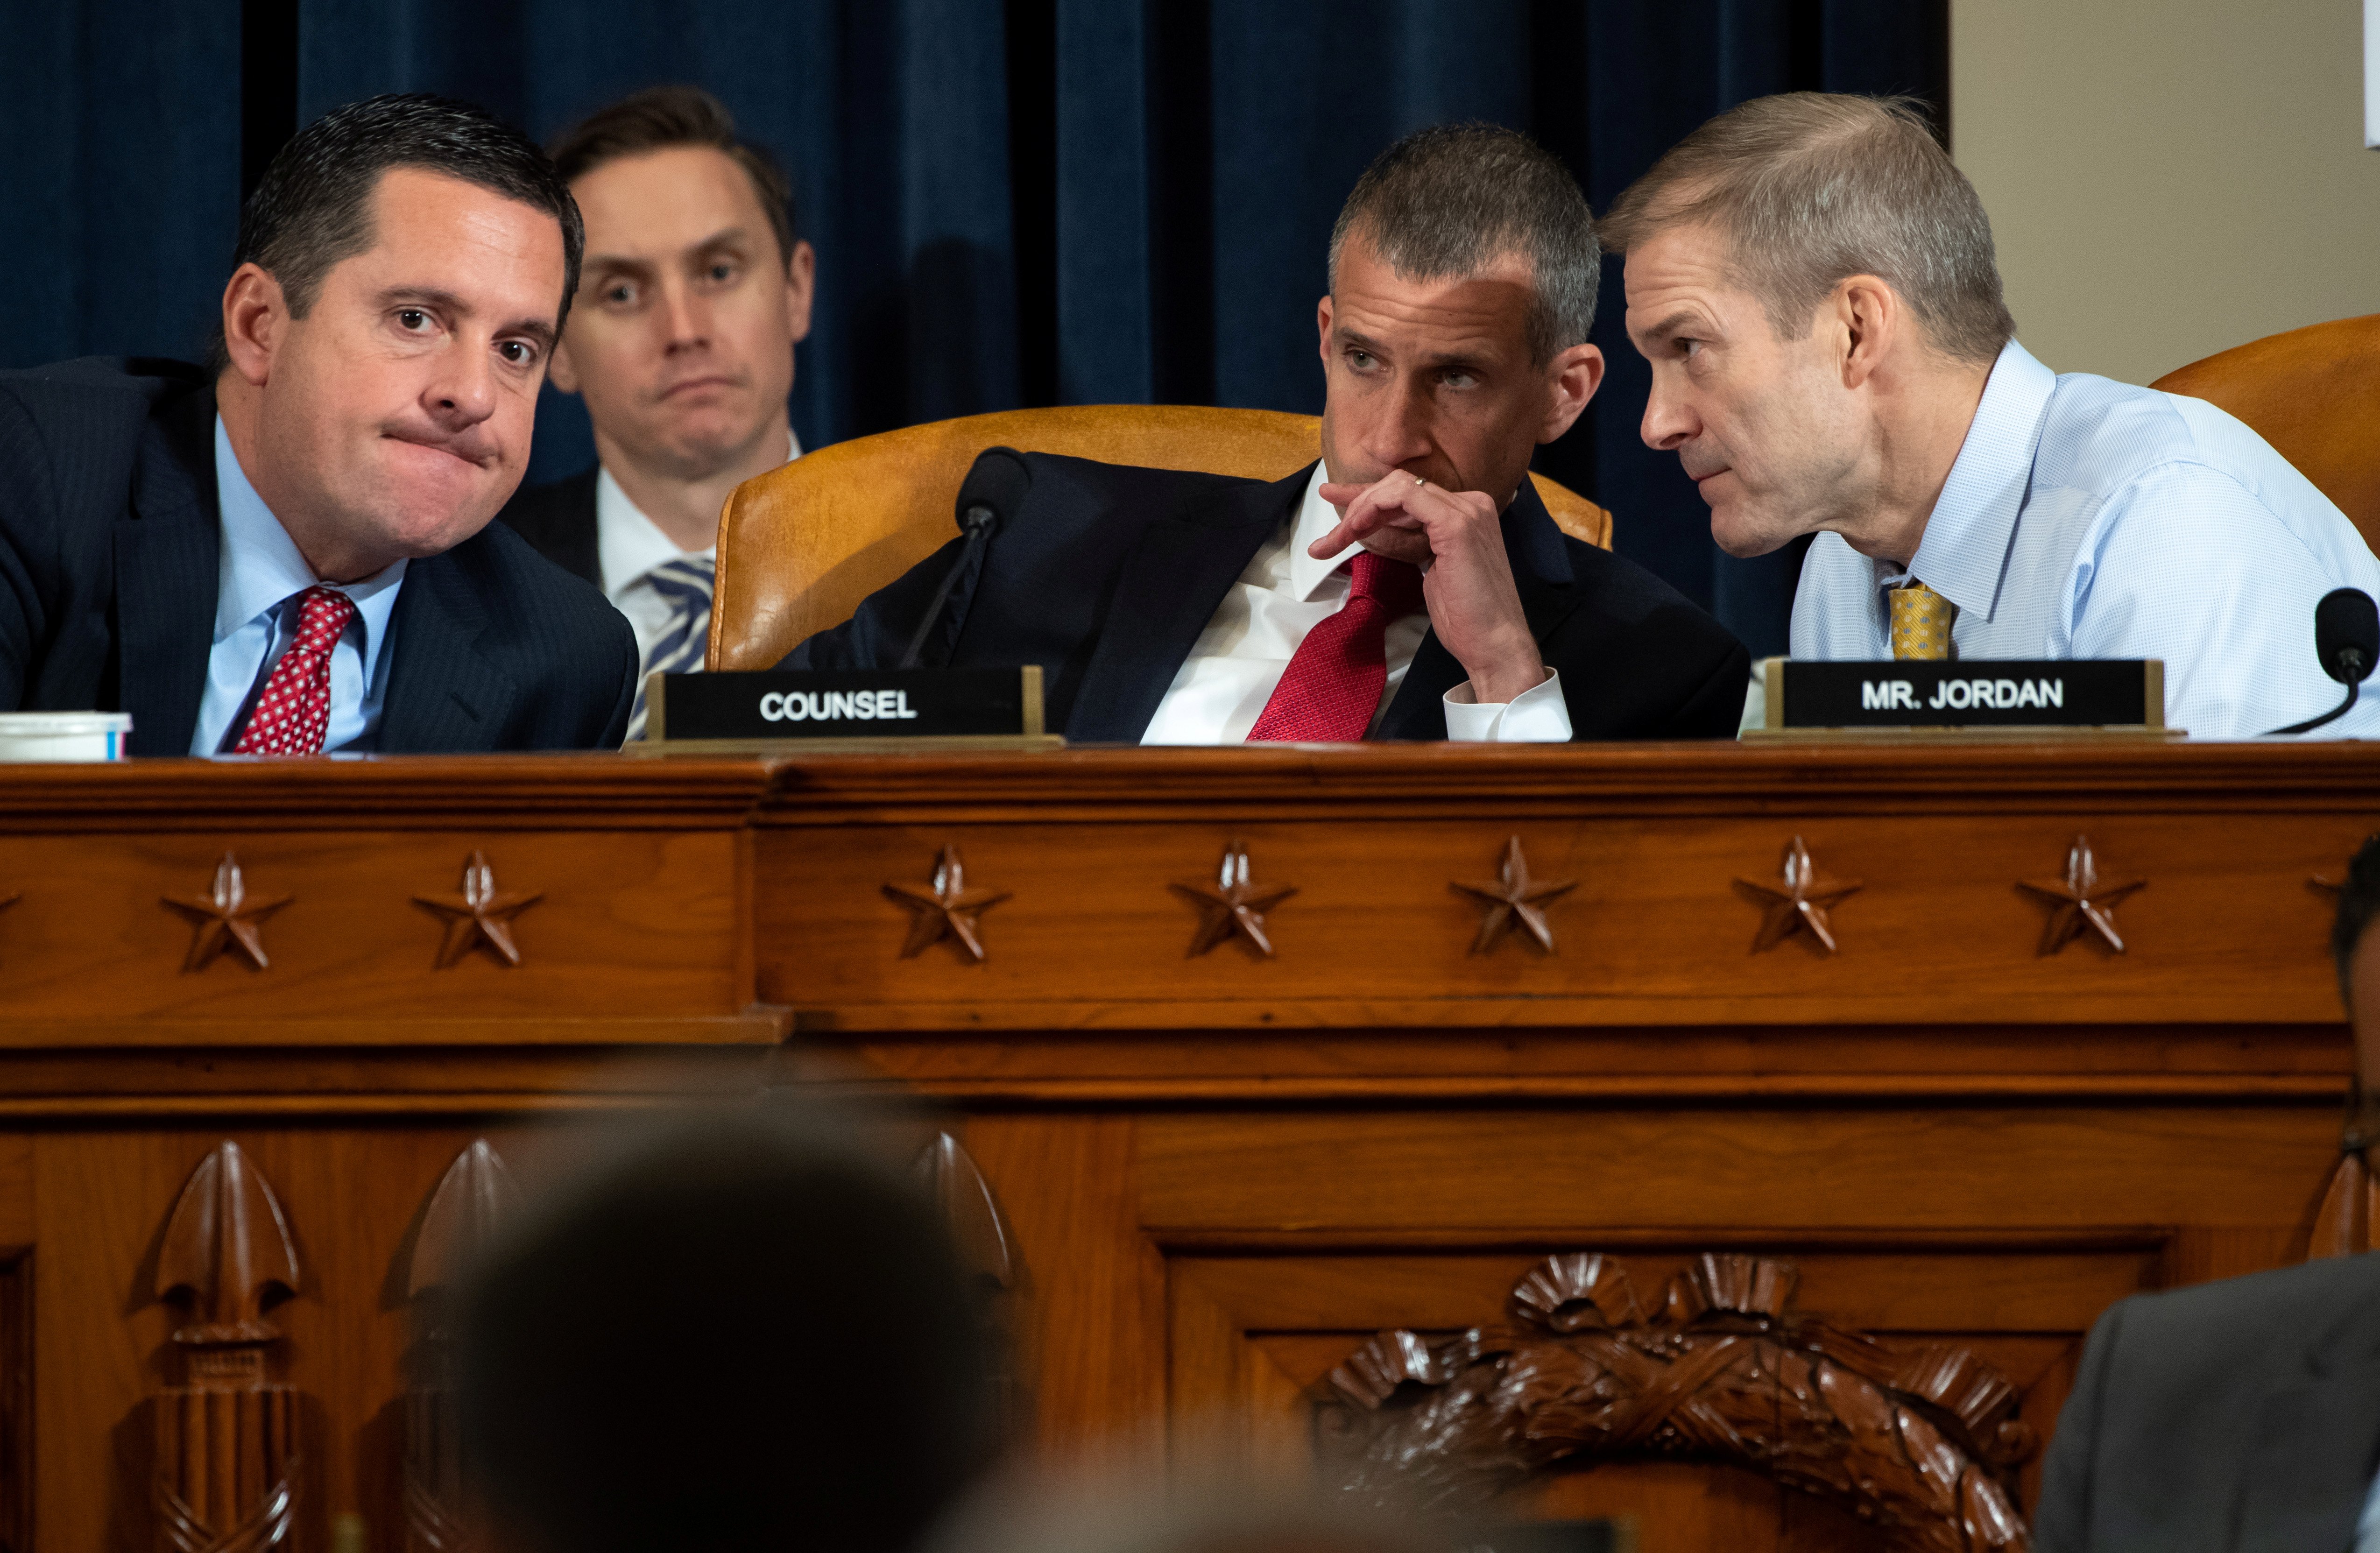 Ranking Member Devin Nunes (L), Republican of California, speaks with Representative Jim Jordan (R), Republican of Ohio, and Republican Counsel Stephen Castor (C), during the first public hearings held by the House Permanent Select Committee on Intelligence as part of the impeachment inquiry into U.S. President Donald Trump, with witnesses Ukrainian Ambassador William Taylor and Deputy Assistant Secretary George Kent testifying, on Capitol Hill in Washington, DC, U.S., November 13, 2019. Saul Loeb/Pool via REUTERS